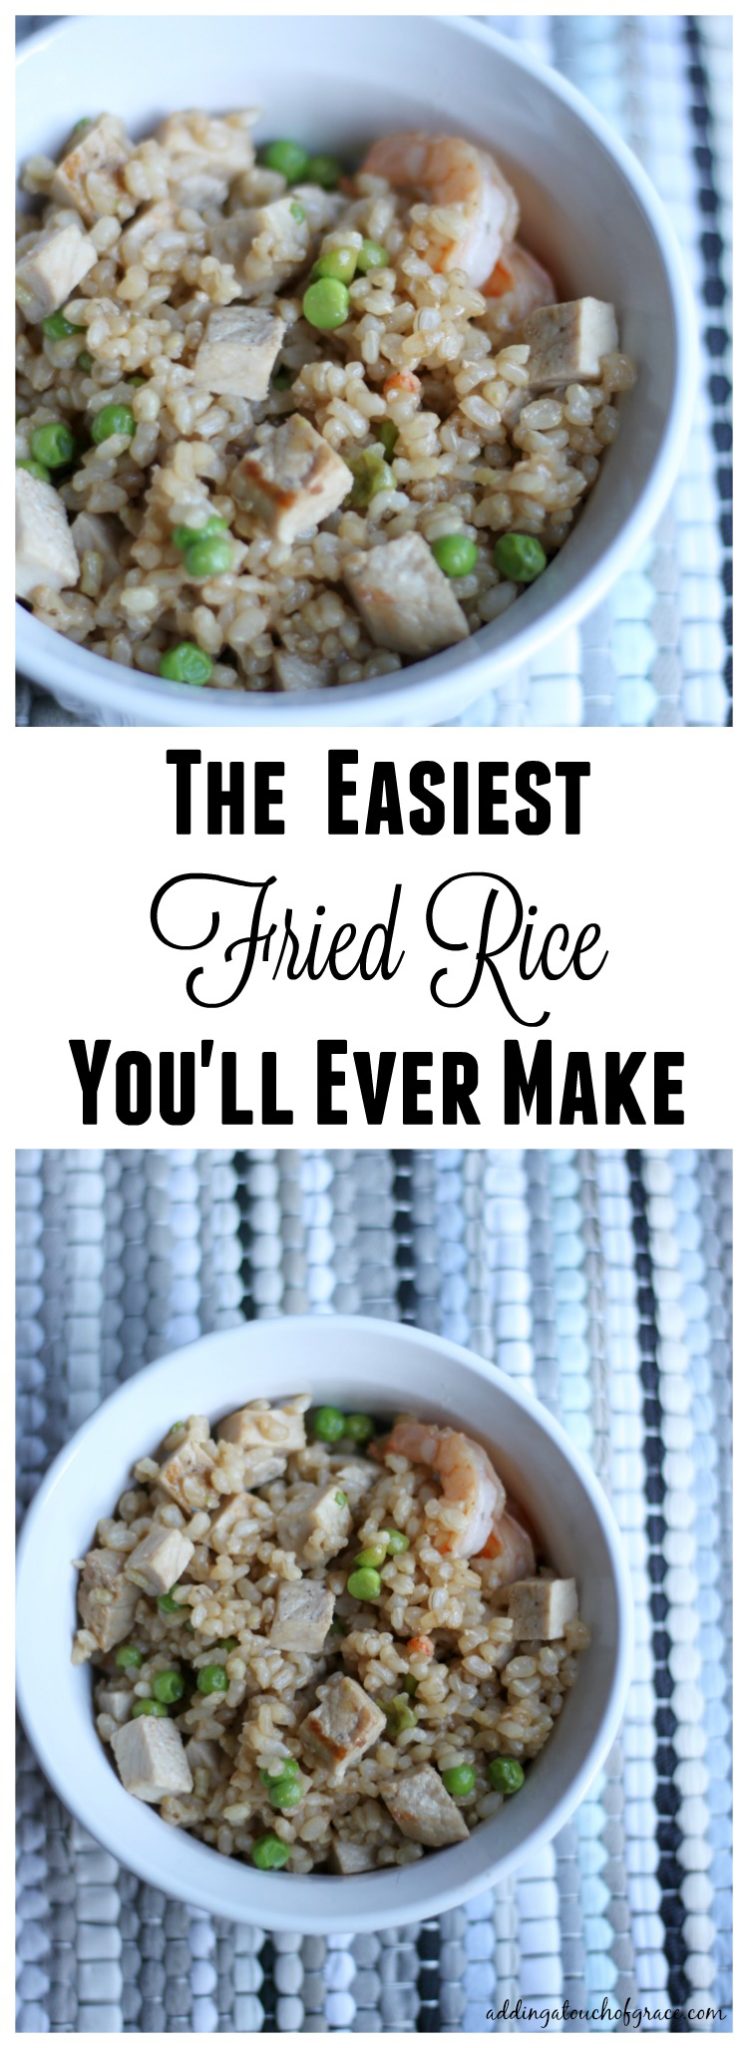 If you're crunched for time in the evening and are looking to try something new, this simple fried rice recipe is restaurant quality.